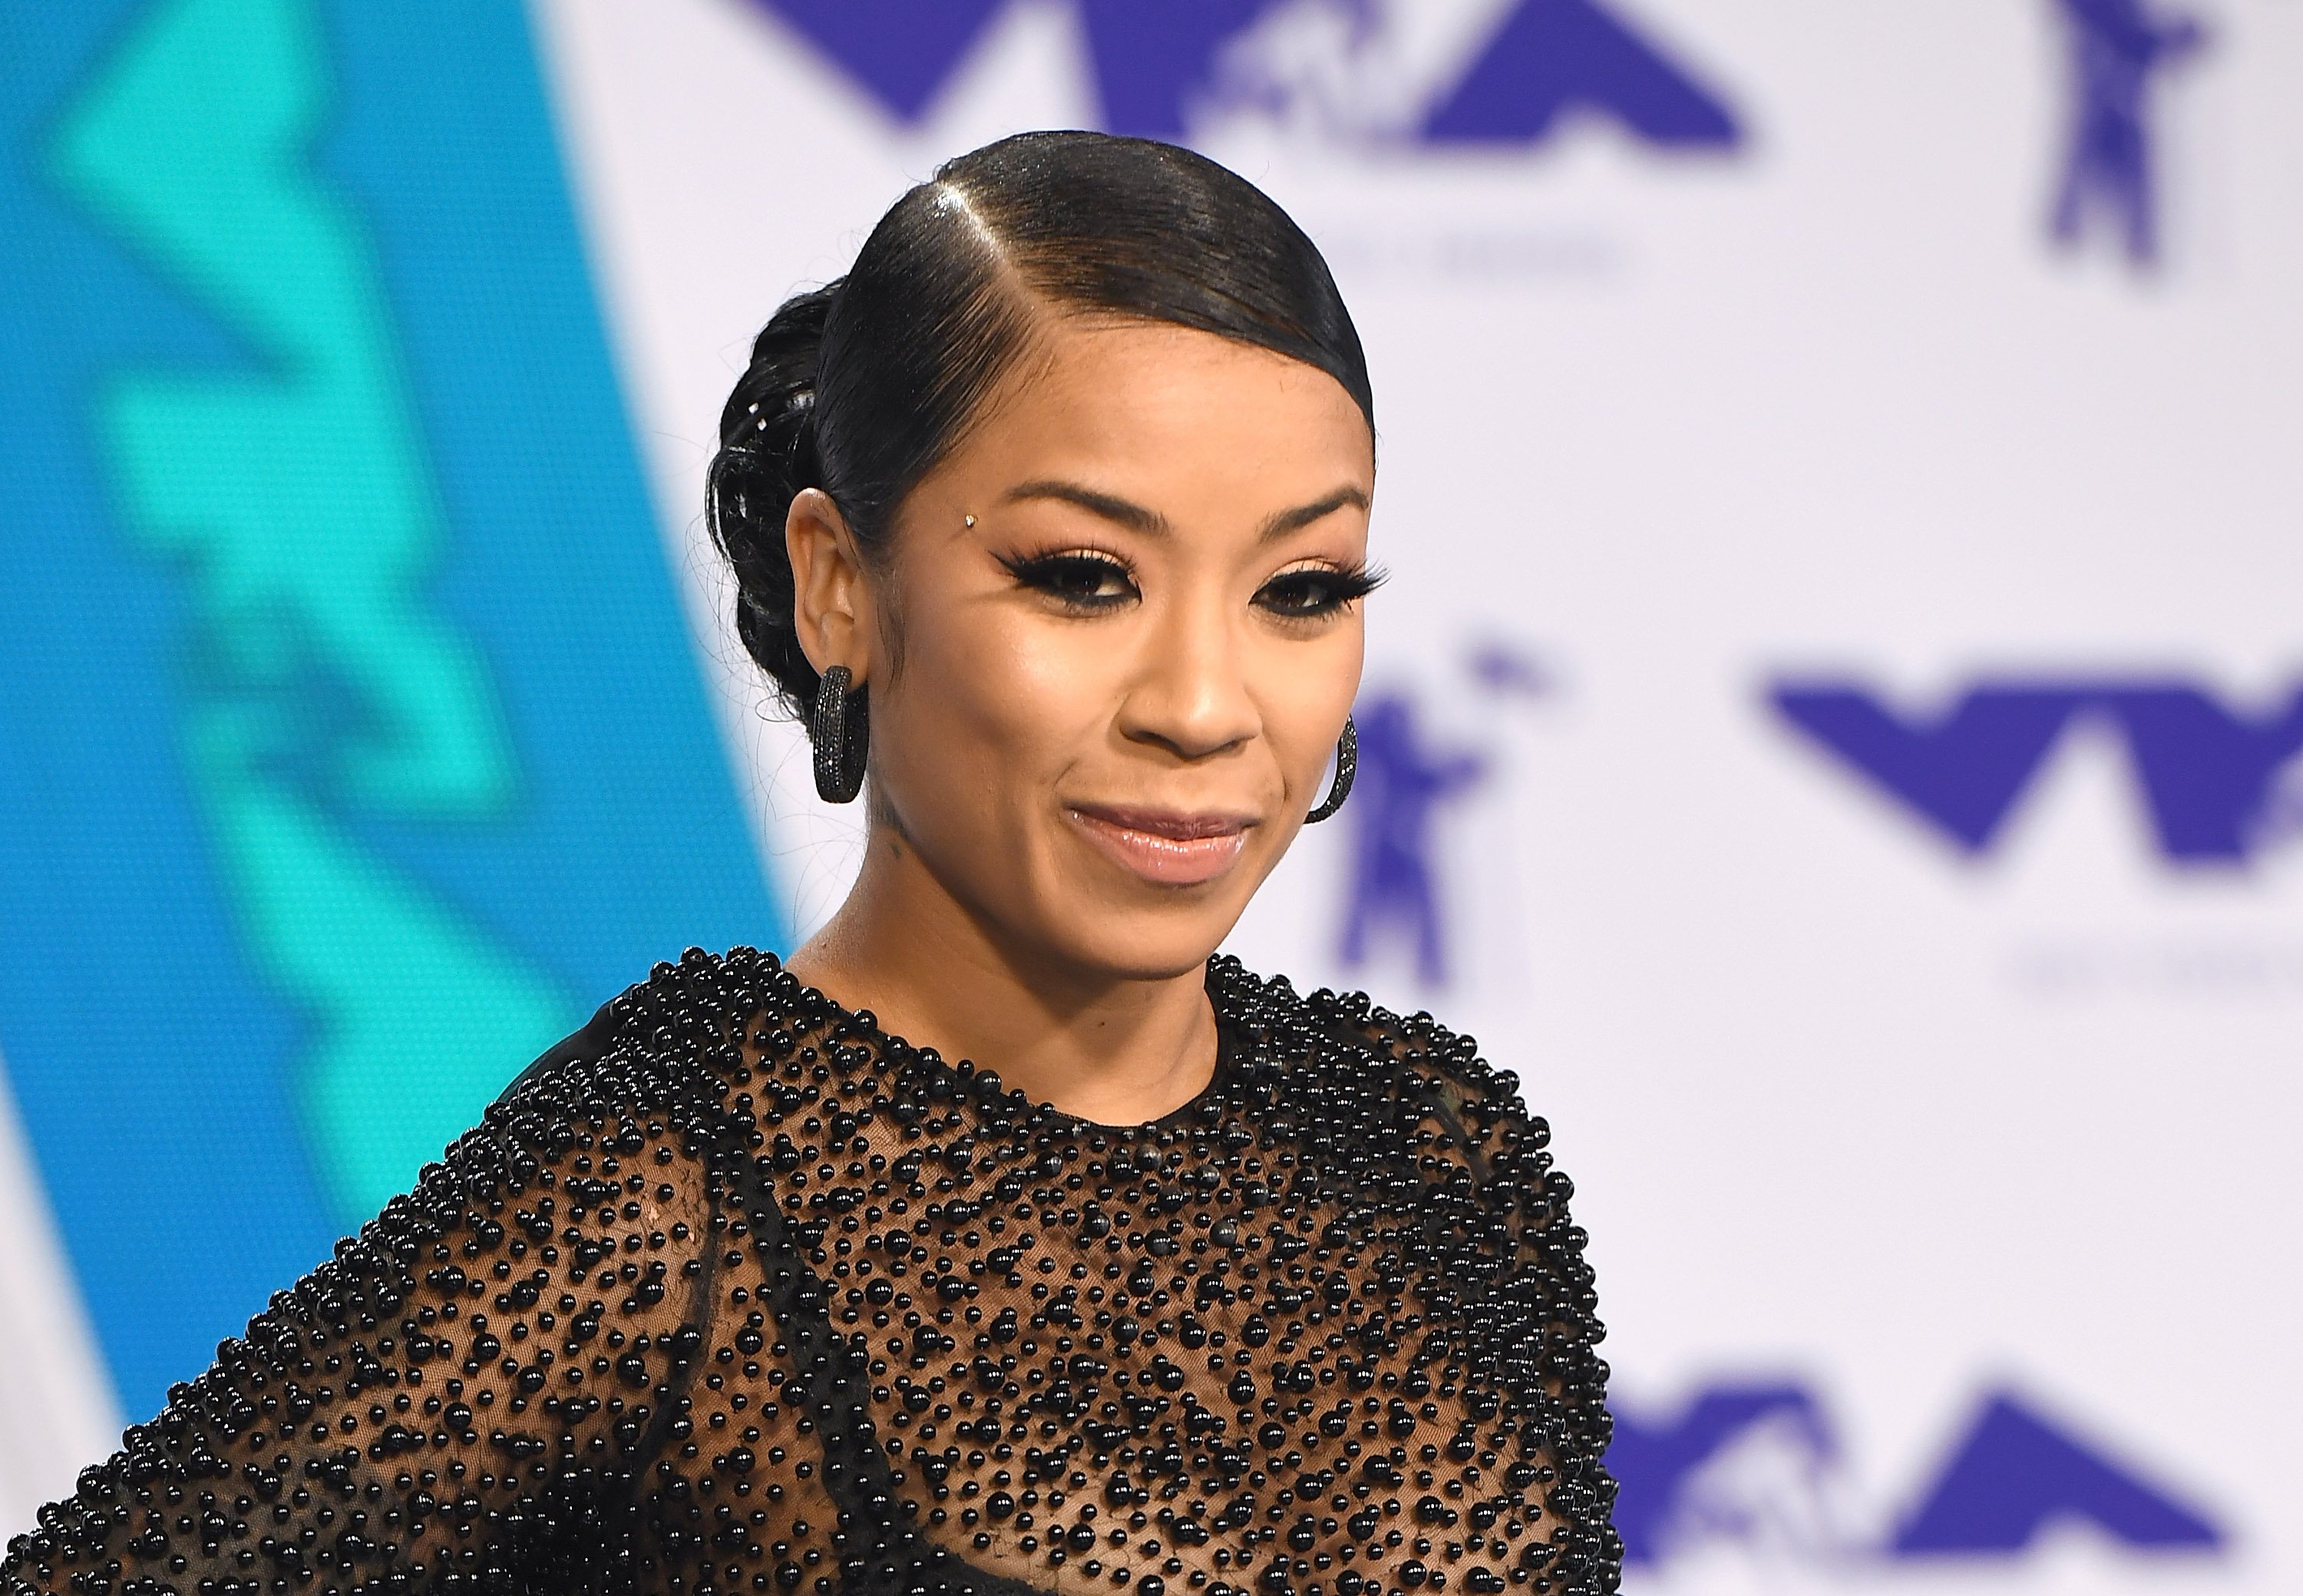 Keyshia Cole at the 2017 MTV Video Music Awards at The Forum on August 27, 2017. |Photo: Getty Images